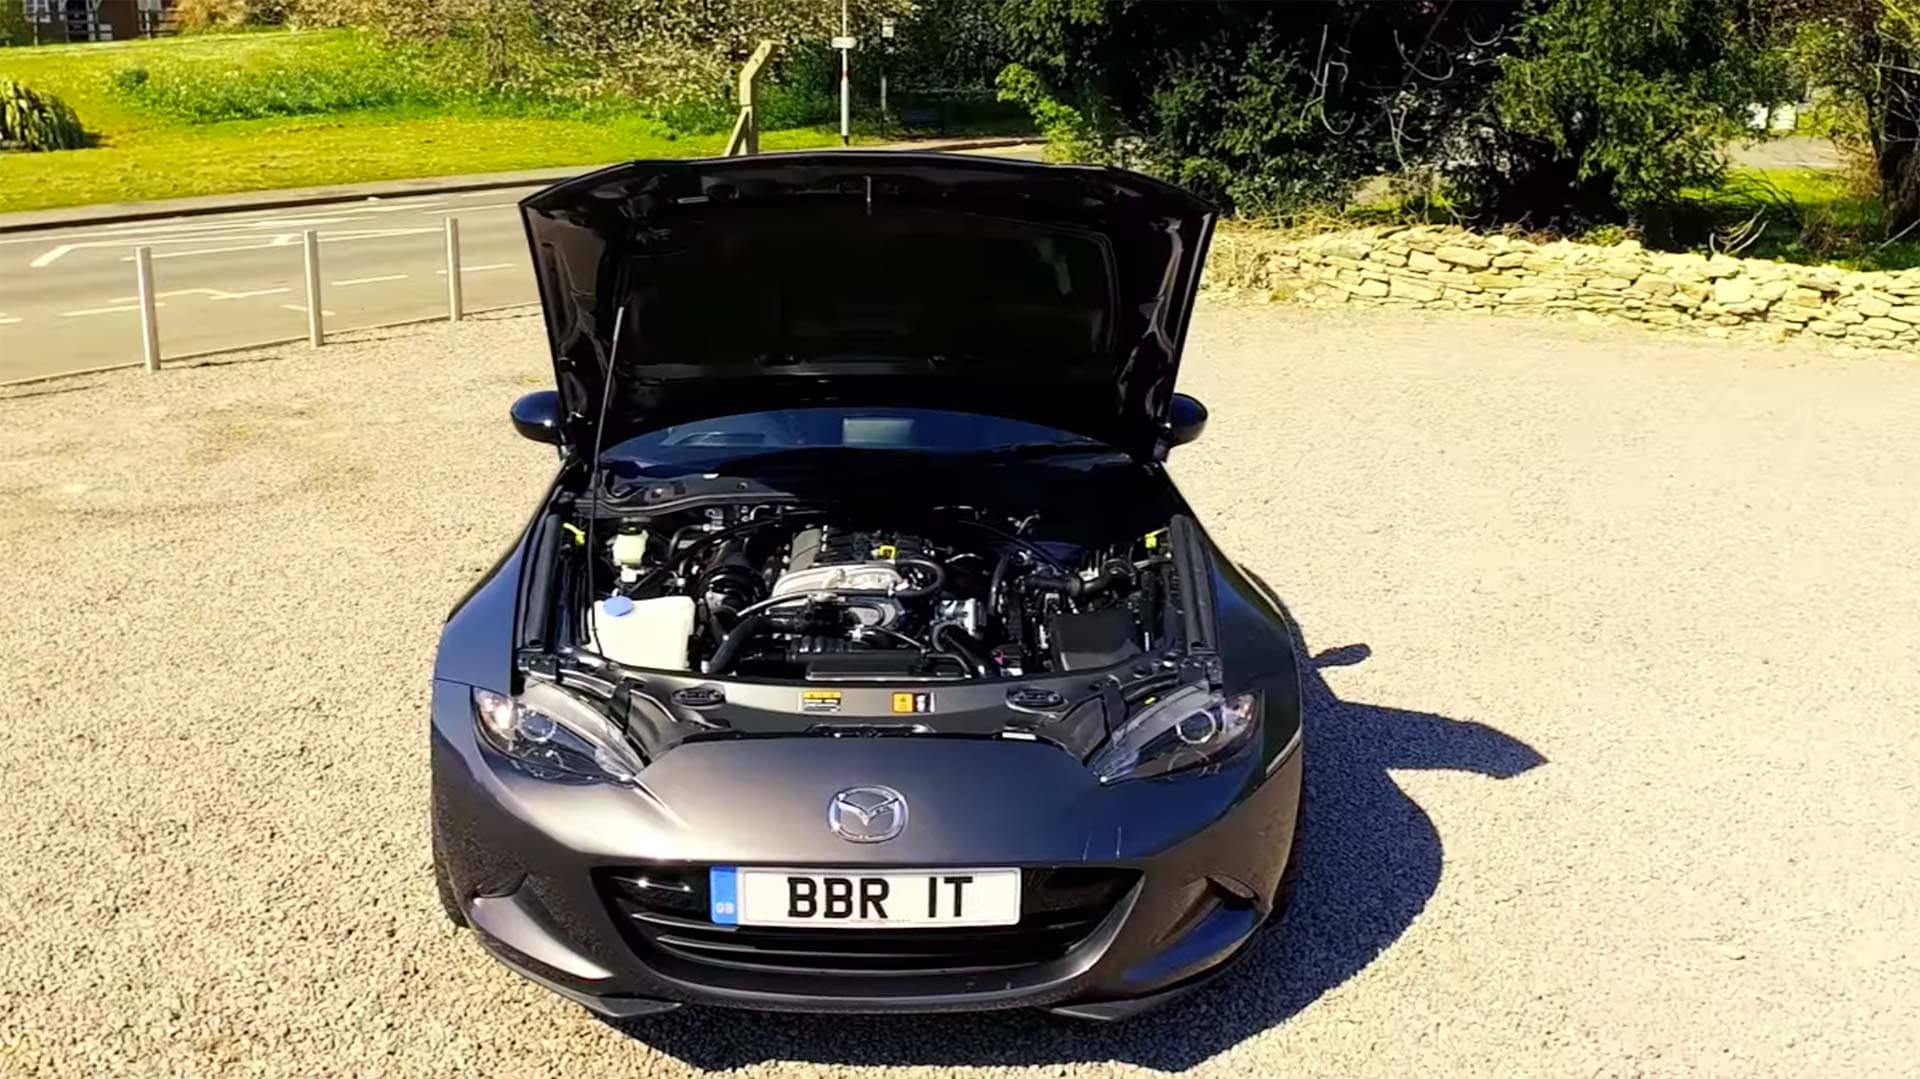 BBR’s New Stage 1 Turbocharger Adds Nearly 100 Horsepower to the Mazda Miata